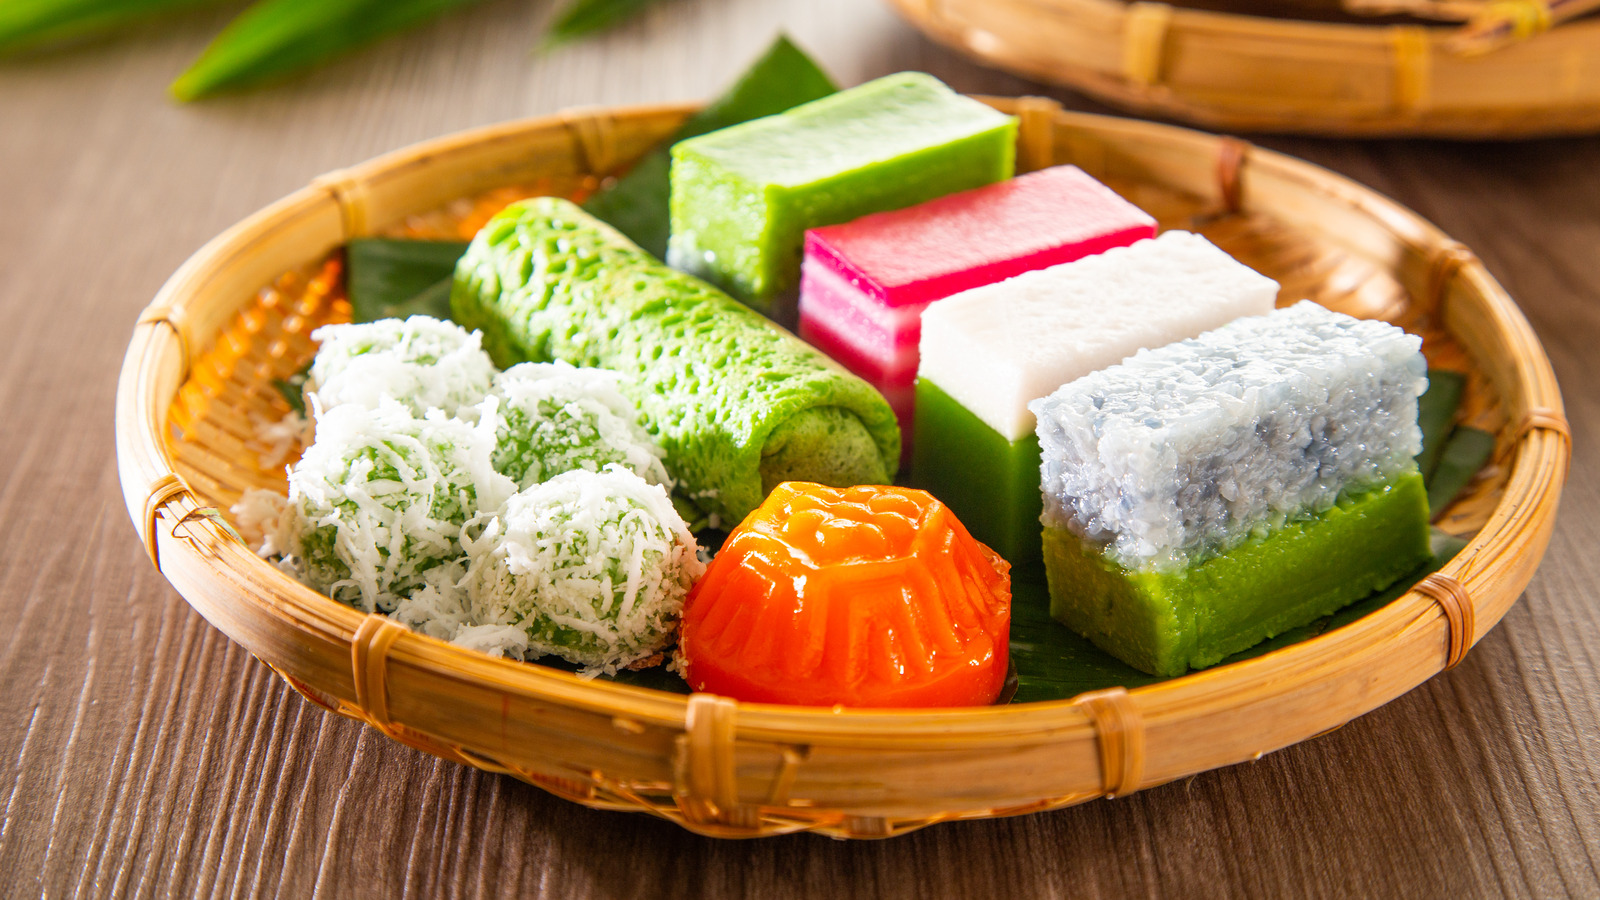 Malaysia's Kuih Desserts Are A World Of Colors And Flavors